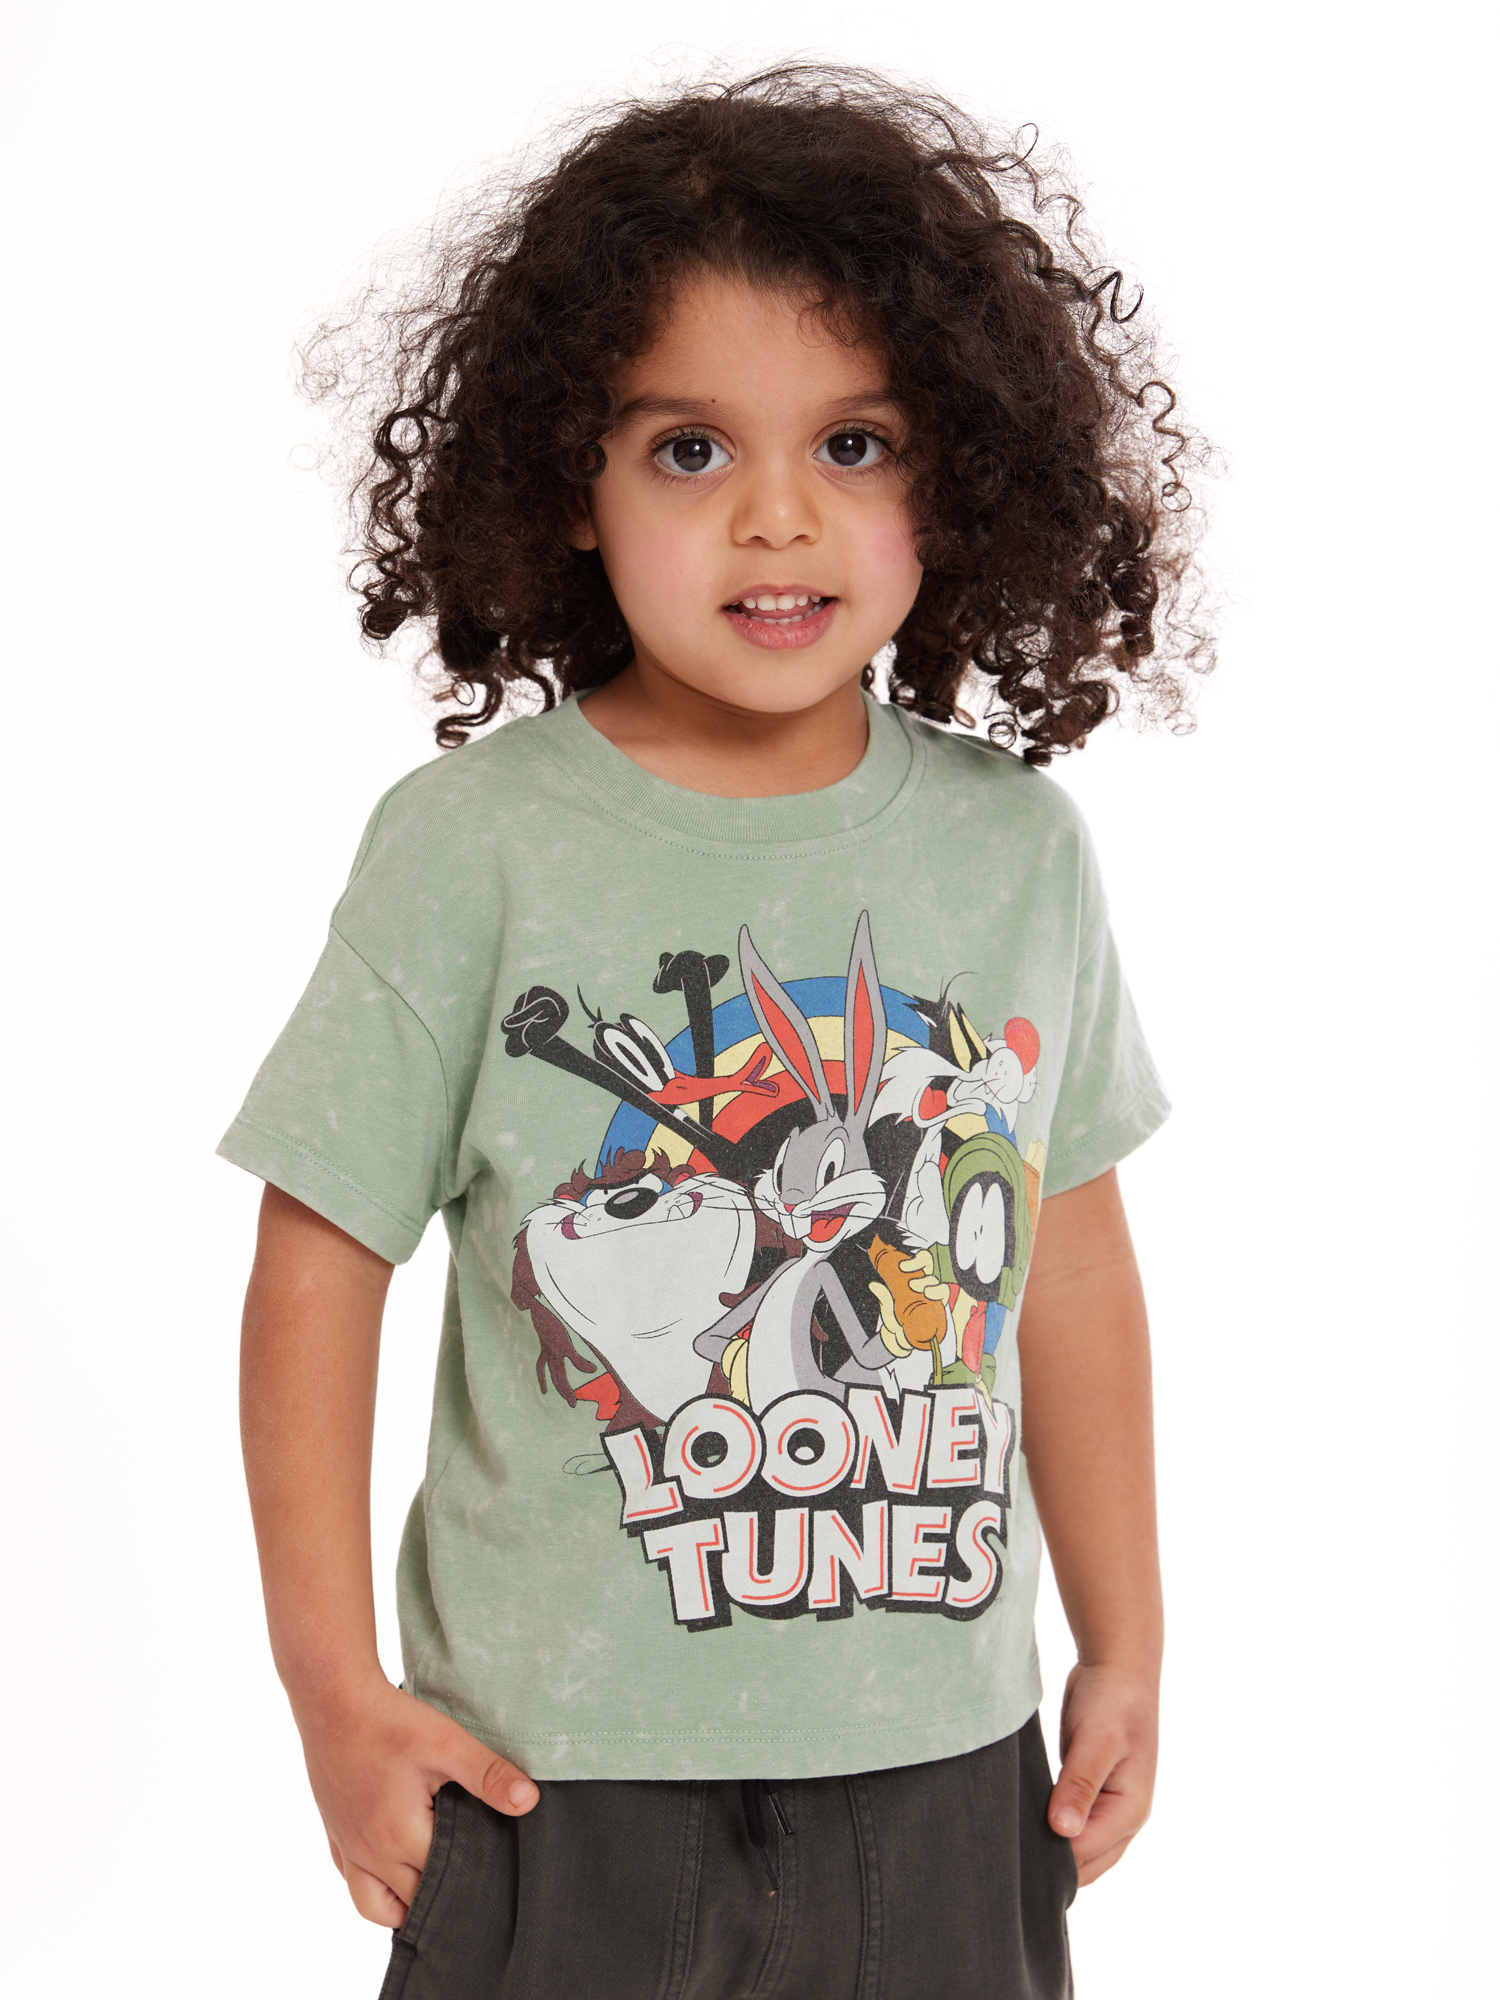 Looney Tunes Toddler Boy Graphic Tees, 2-Pack, Sizes 2T-5T - image 4 of 8